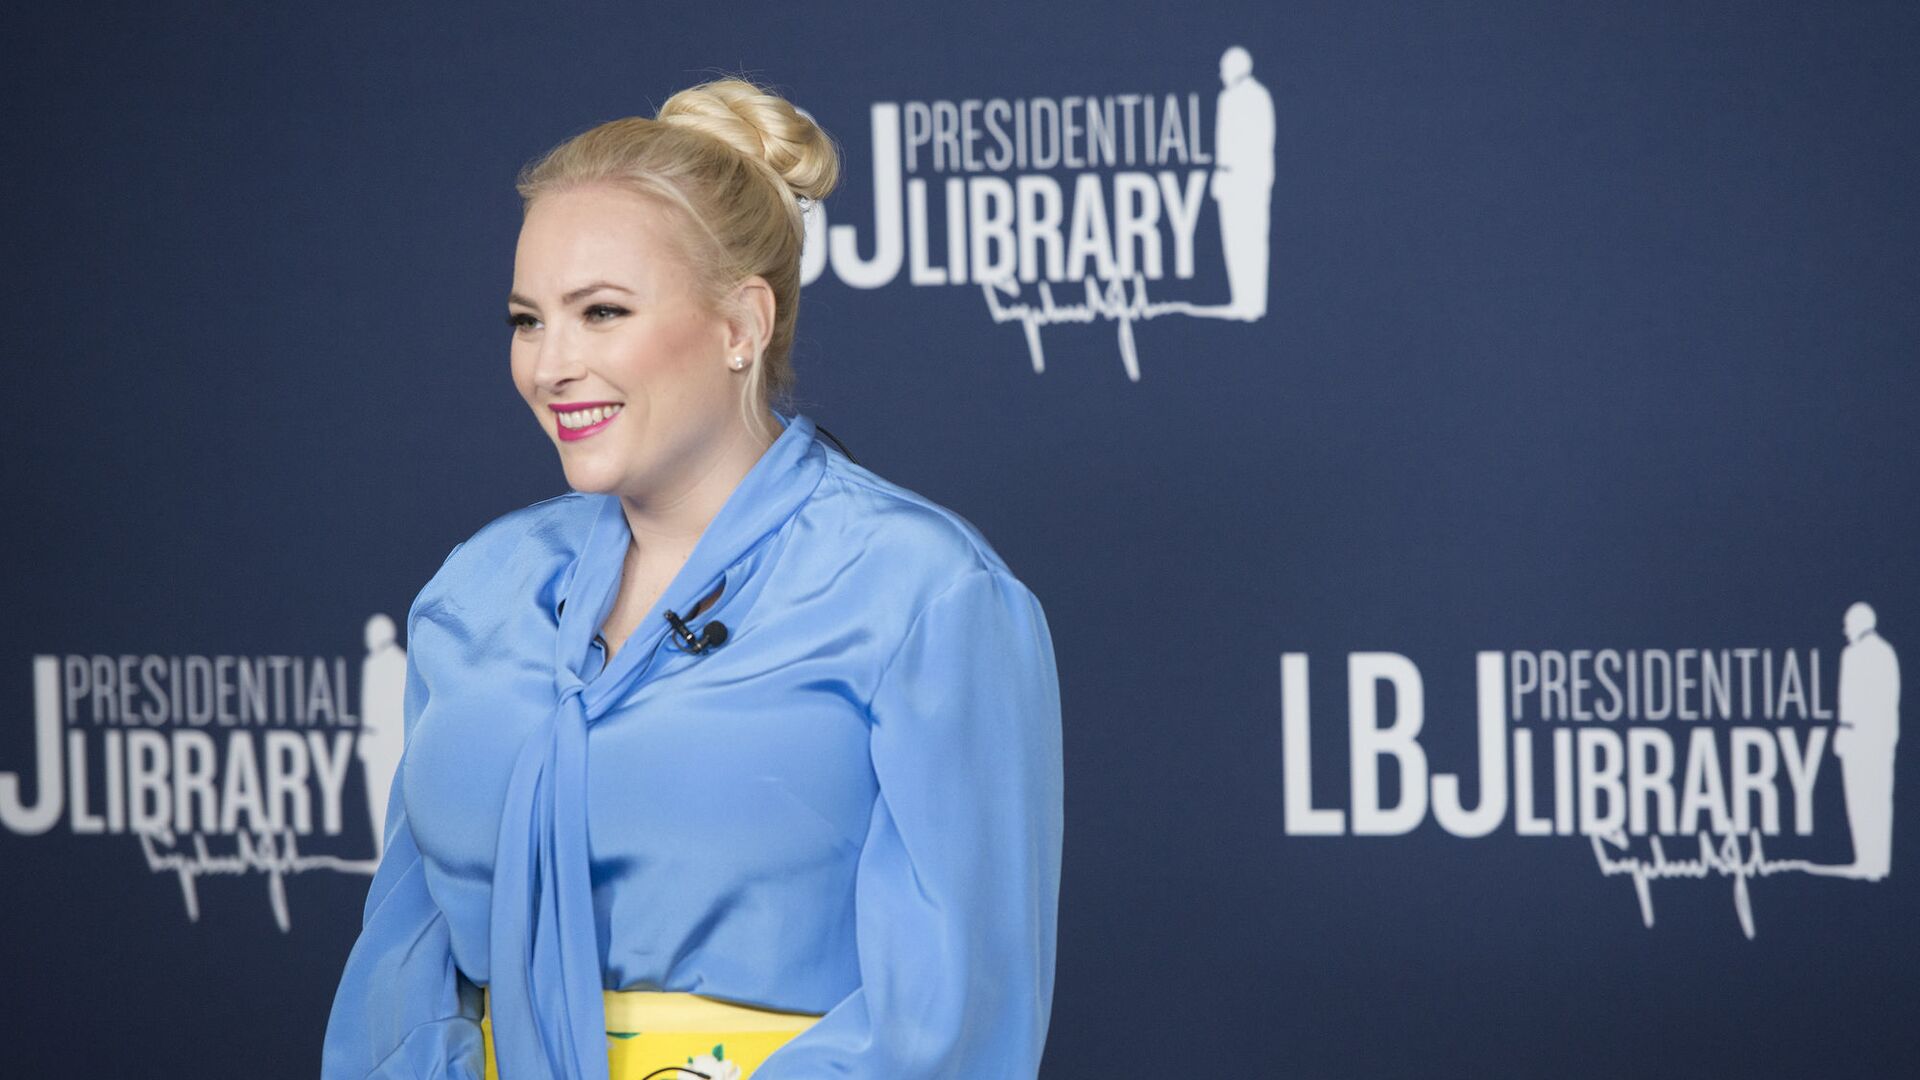 Meghan McCain answers questions for Austin media before the event. - Sputnik International, 1920, 05.03.2022